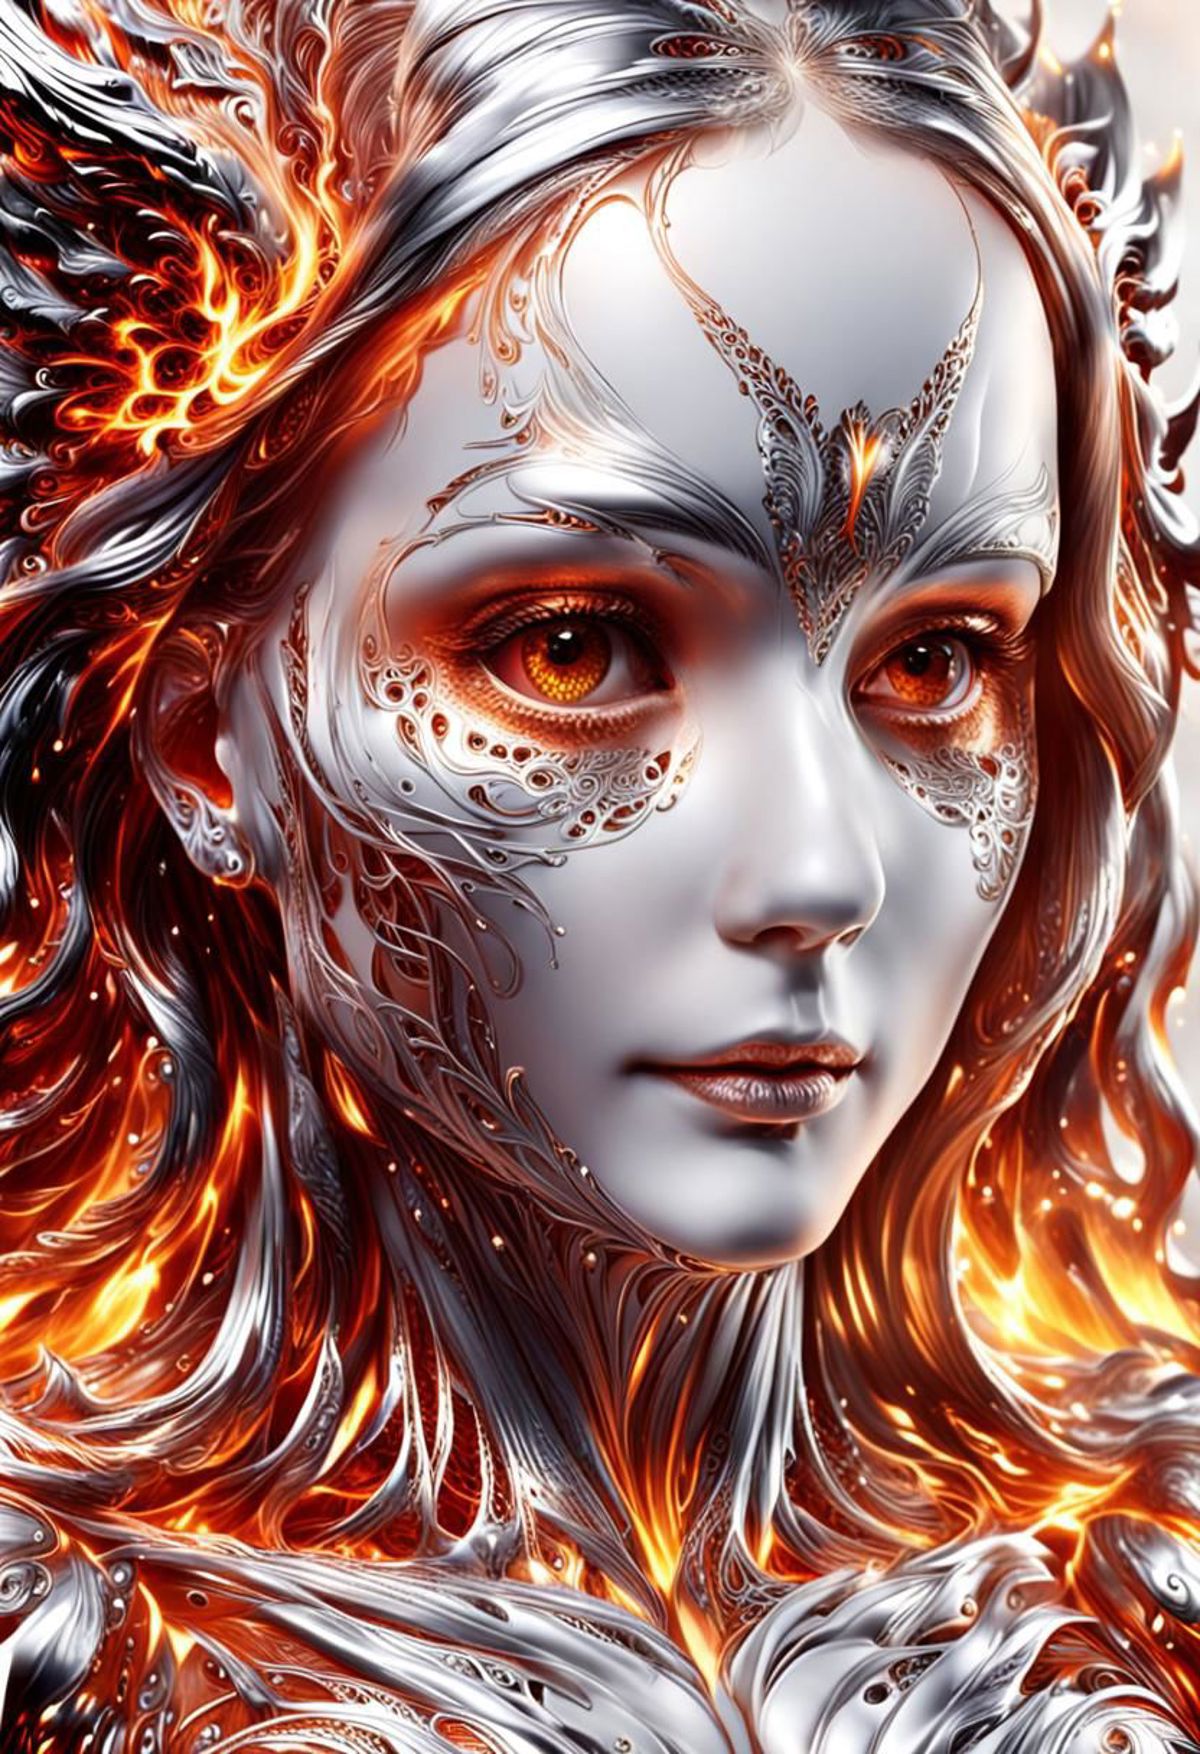 Artistic Portrait of a Woman with Glowing Eyes and a Silver and Gold Design on Her Face